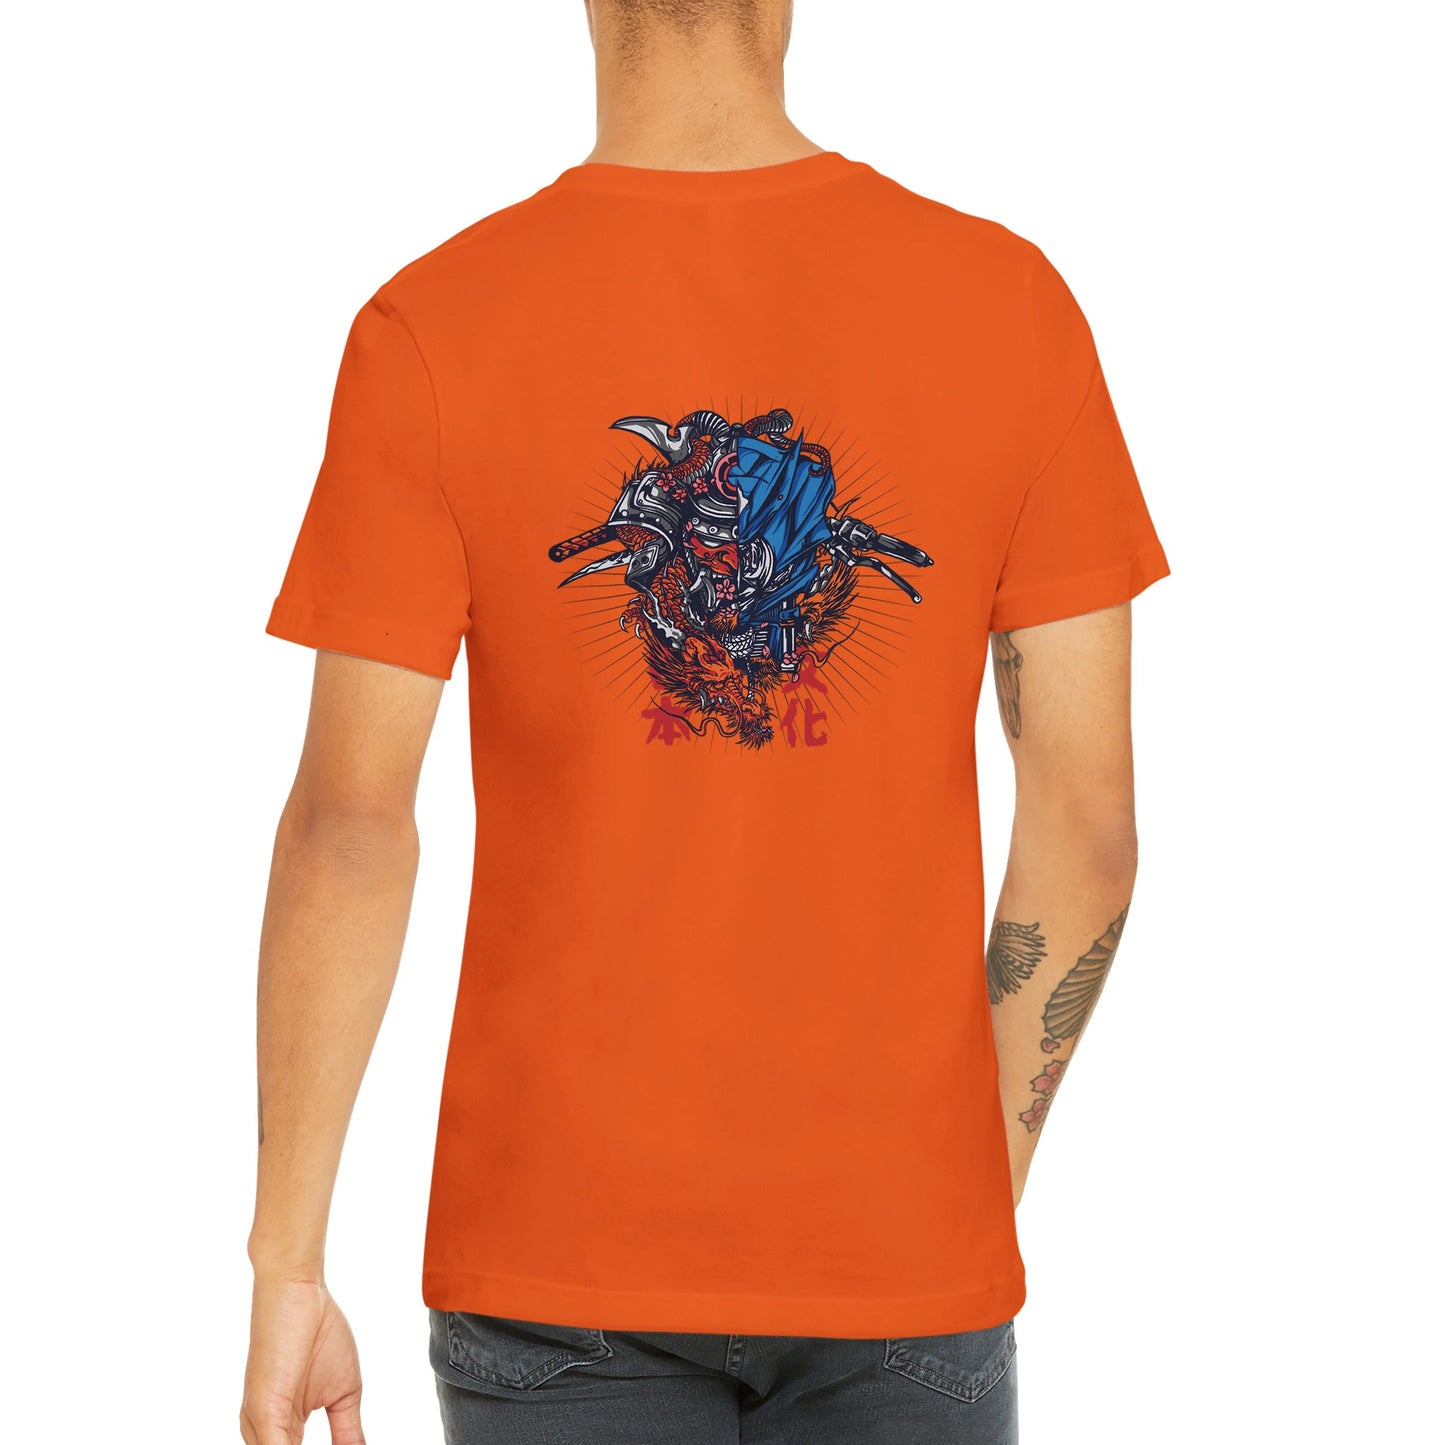 Oni Mask and Motorcycle T-shirt